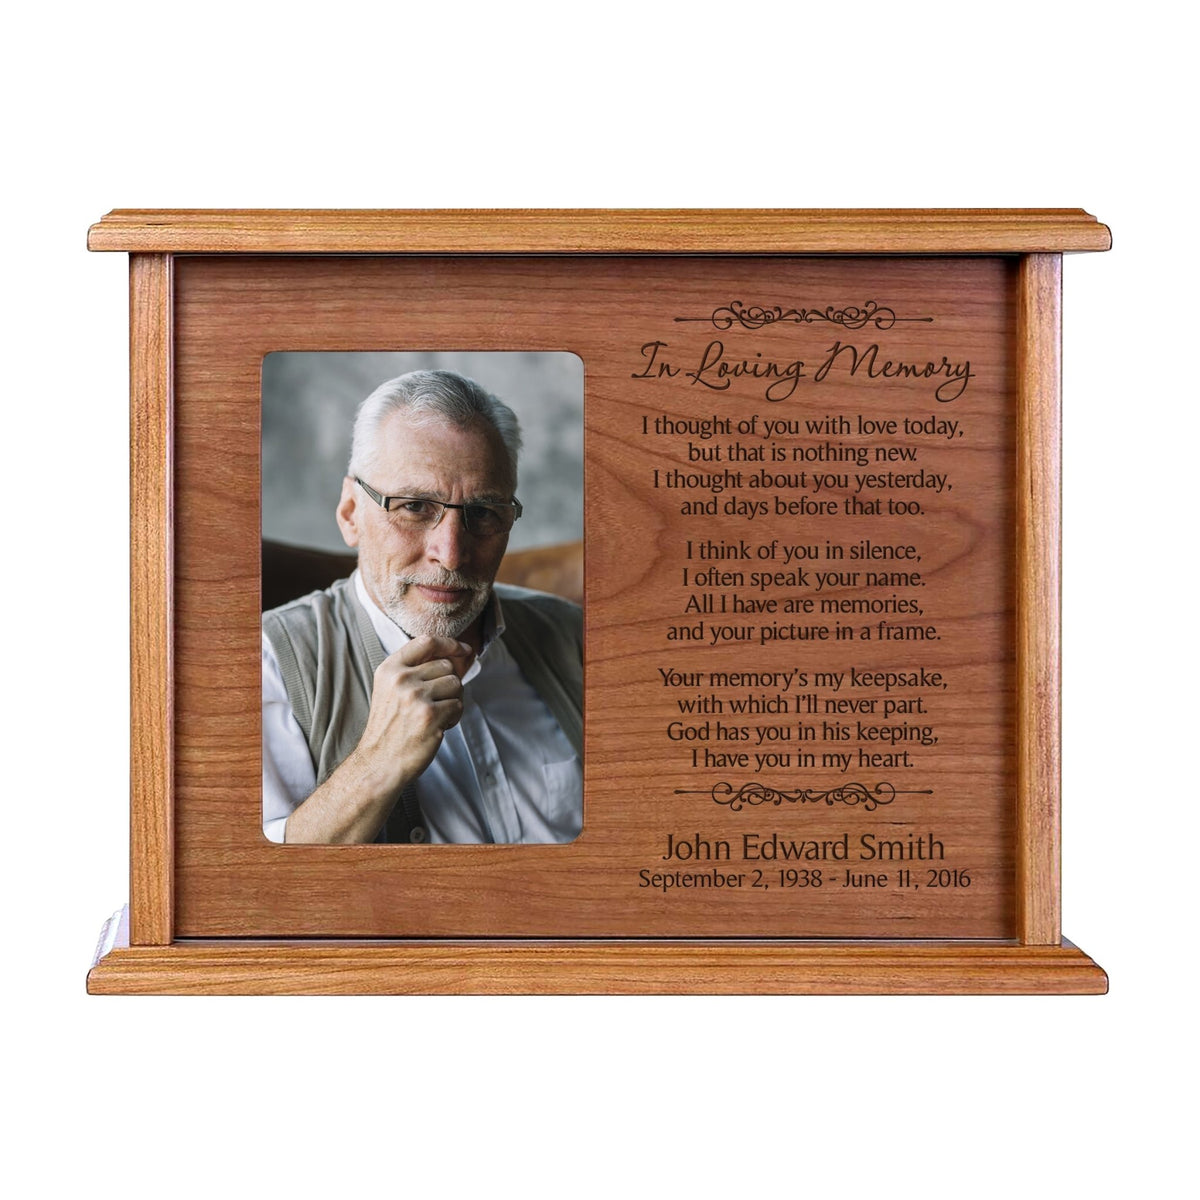 Custom Engraved 12x9 Memorial Keepsake Cremation Urn Box Holds 200 Cu Inches Of Human Ashes and 4x6 Picture In Loving Memory - LifeSong Milestones